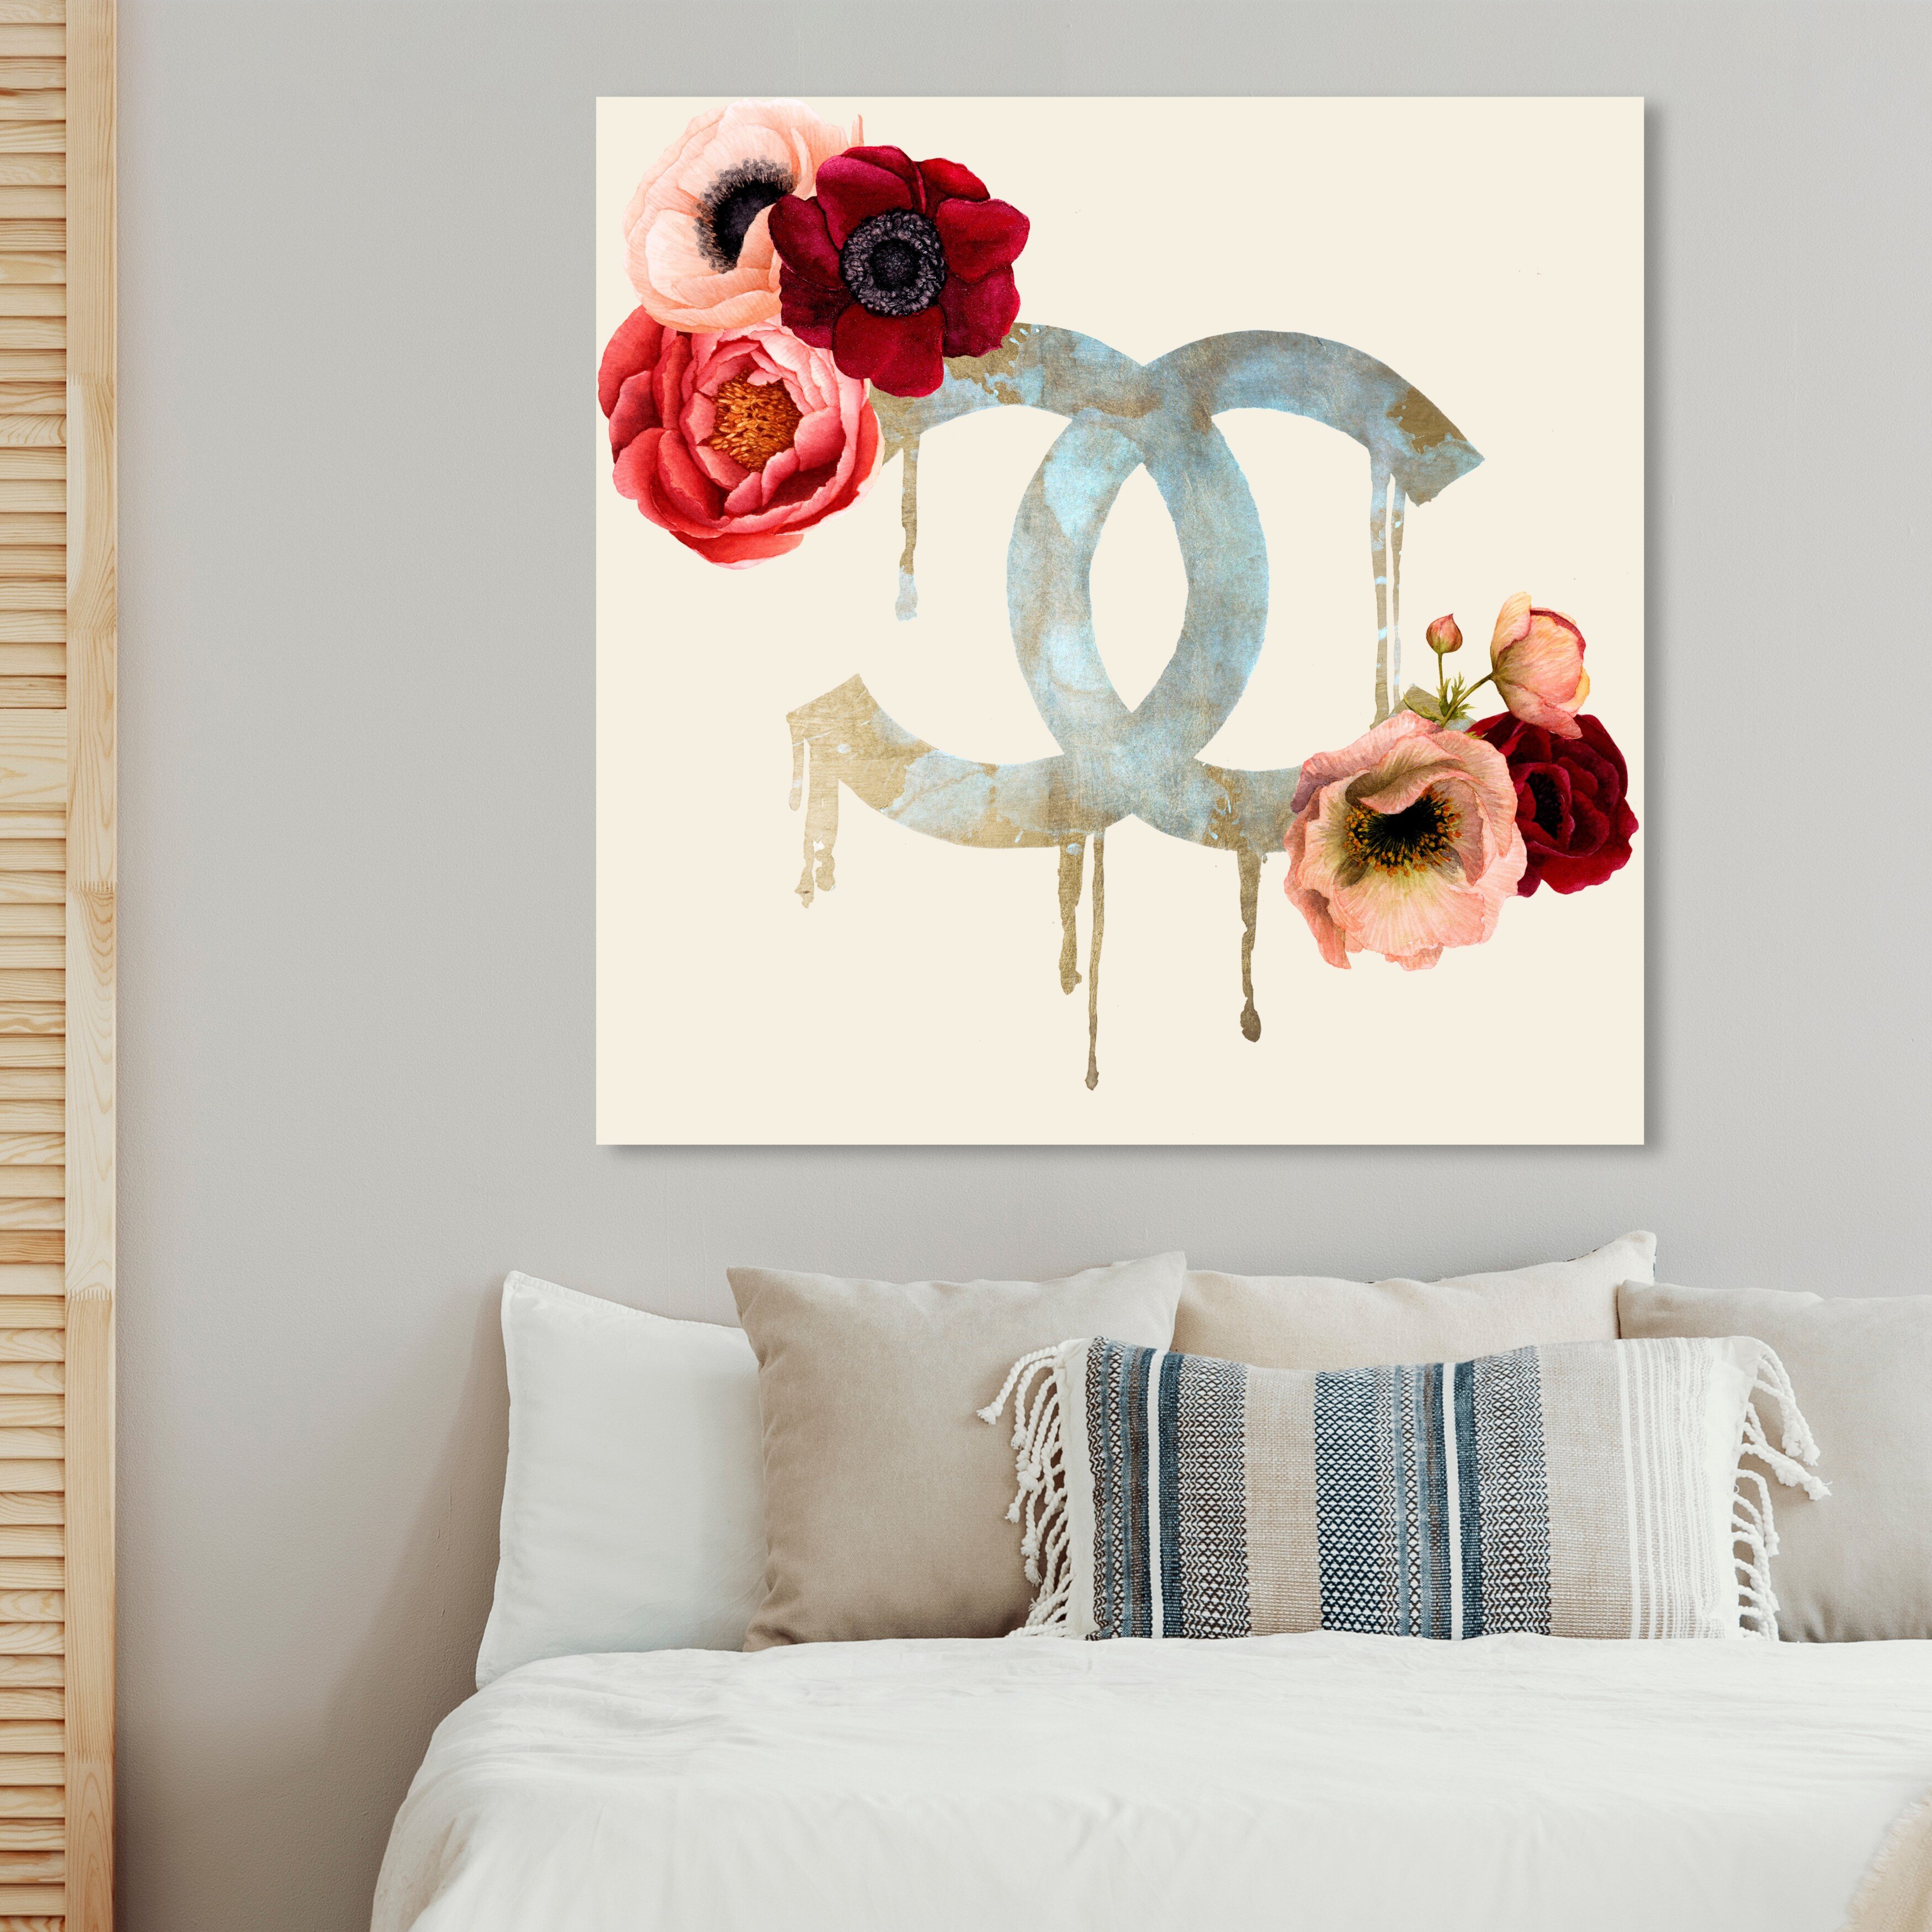 Fashion and Glam Simple French Flowers Romantic - Painting Print on Canvas House of Hampton Format: Wrapped Canvas, Size: 40 H x 40 W x 2 D